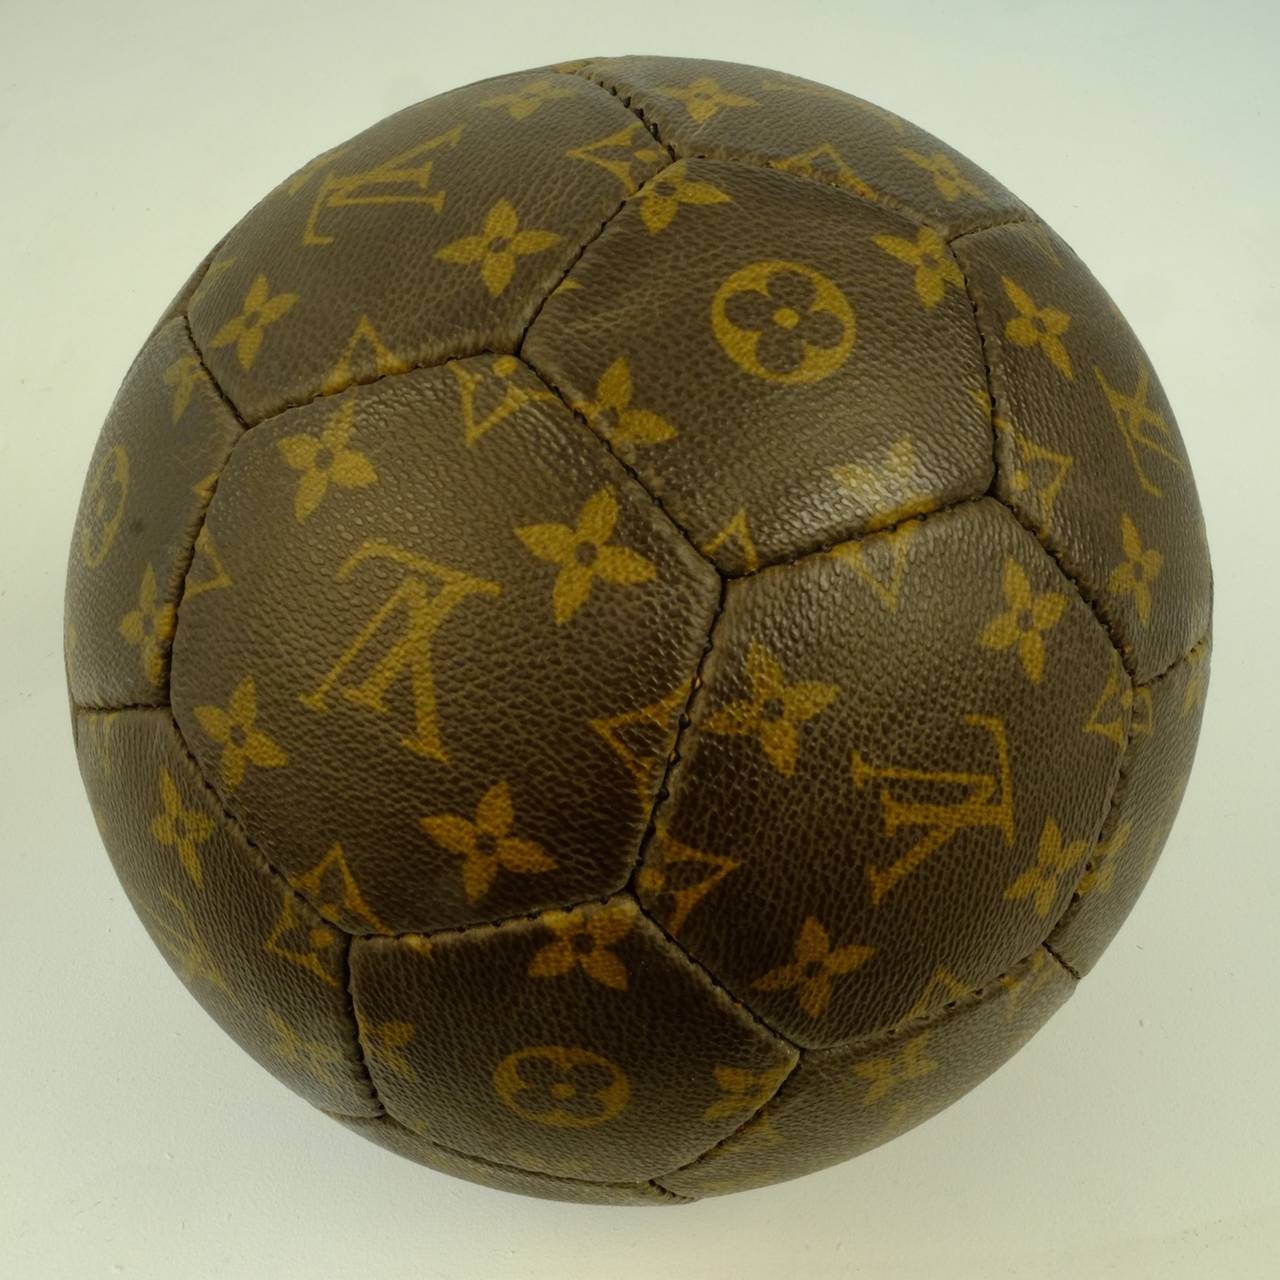 Louis Vuitton Expensive World Cup Football | Confederated Tribes of the Umatilla Indian Reservation